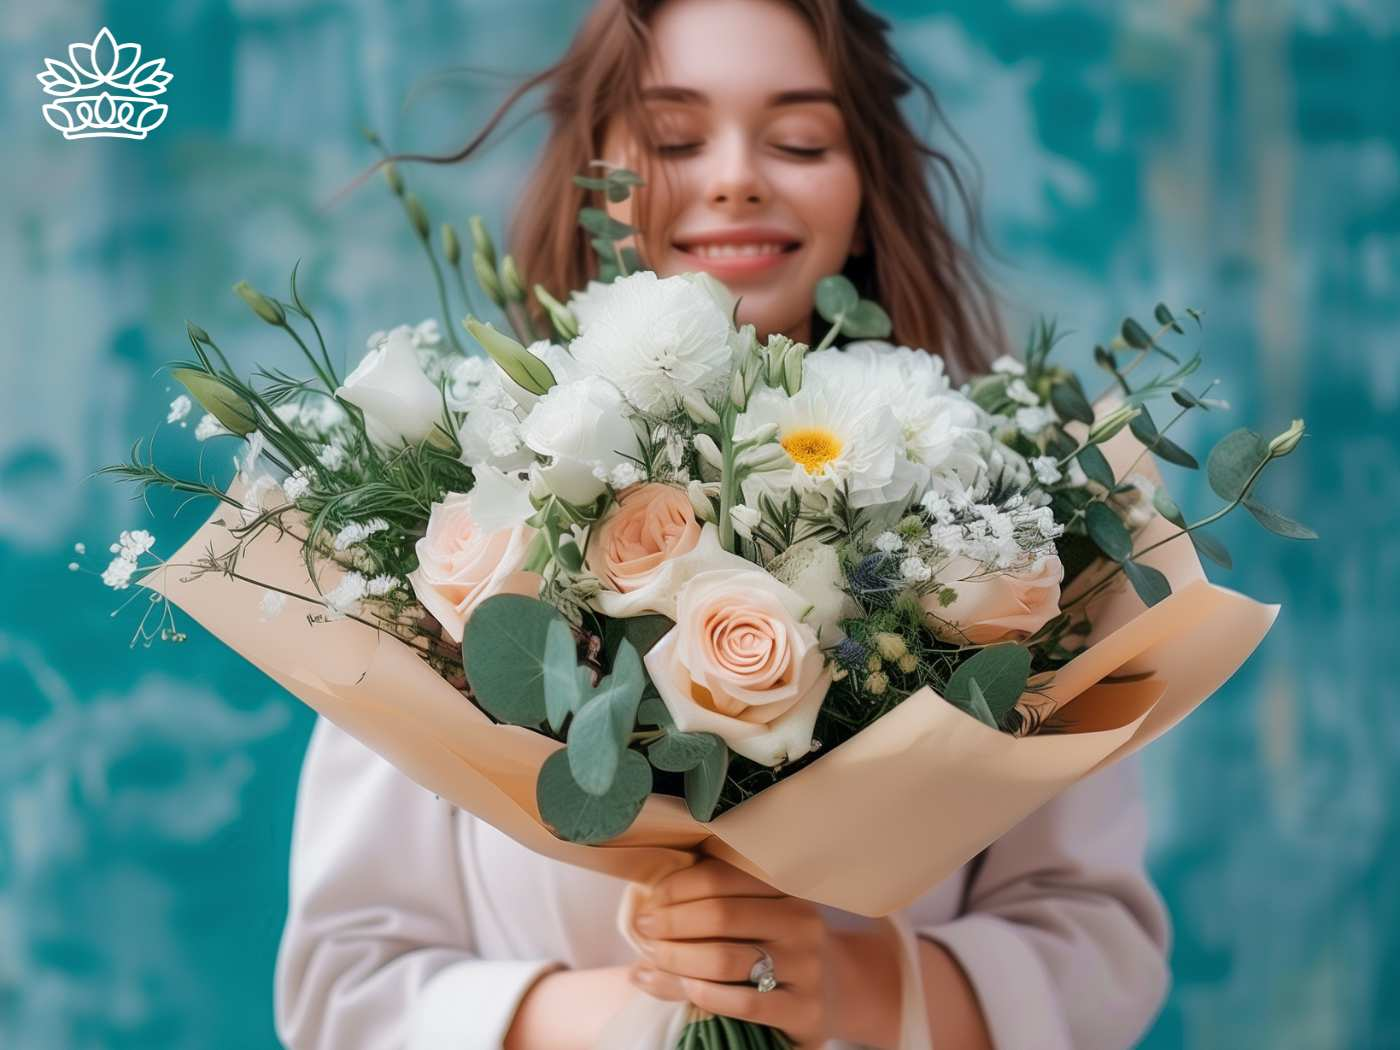 Delighted woman embracing a bouquet of fresh flowers, showcasing the reliable services that create and support family moments, offered by the Cape Town Gift Delivery Collection with options including wine, for customers who value quality, from the Fabulous Flowers and Gifts website.